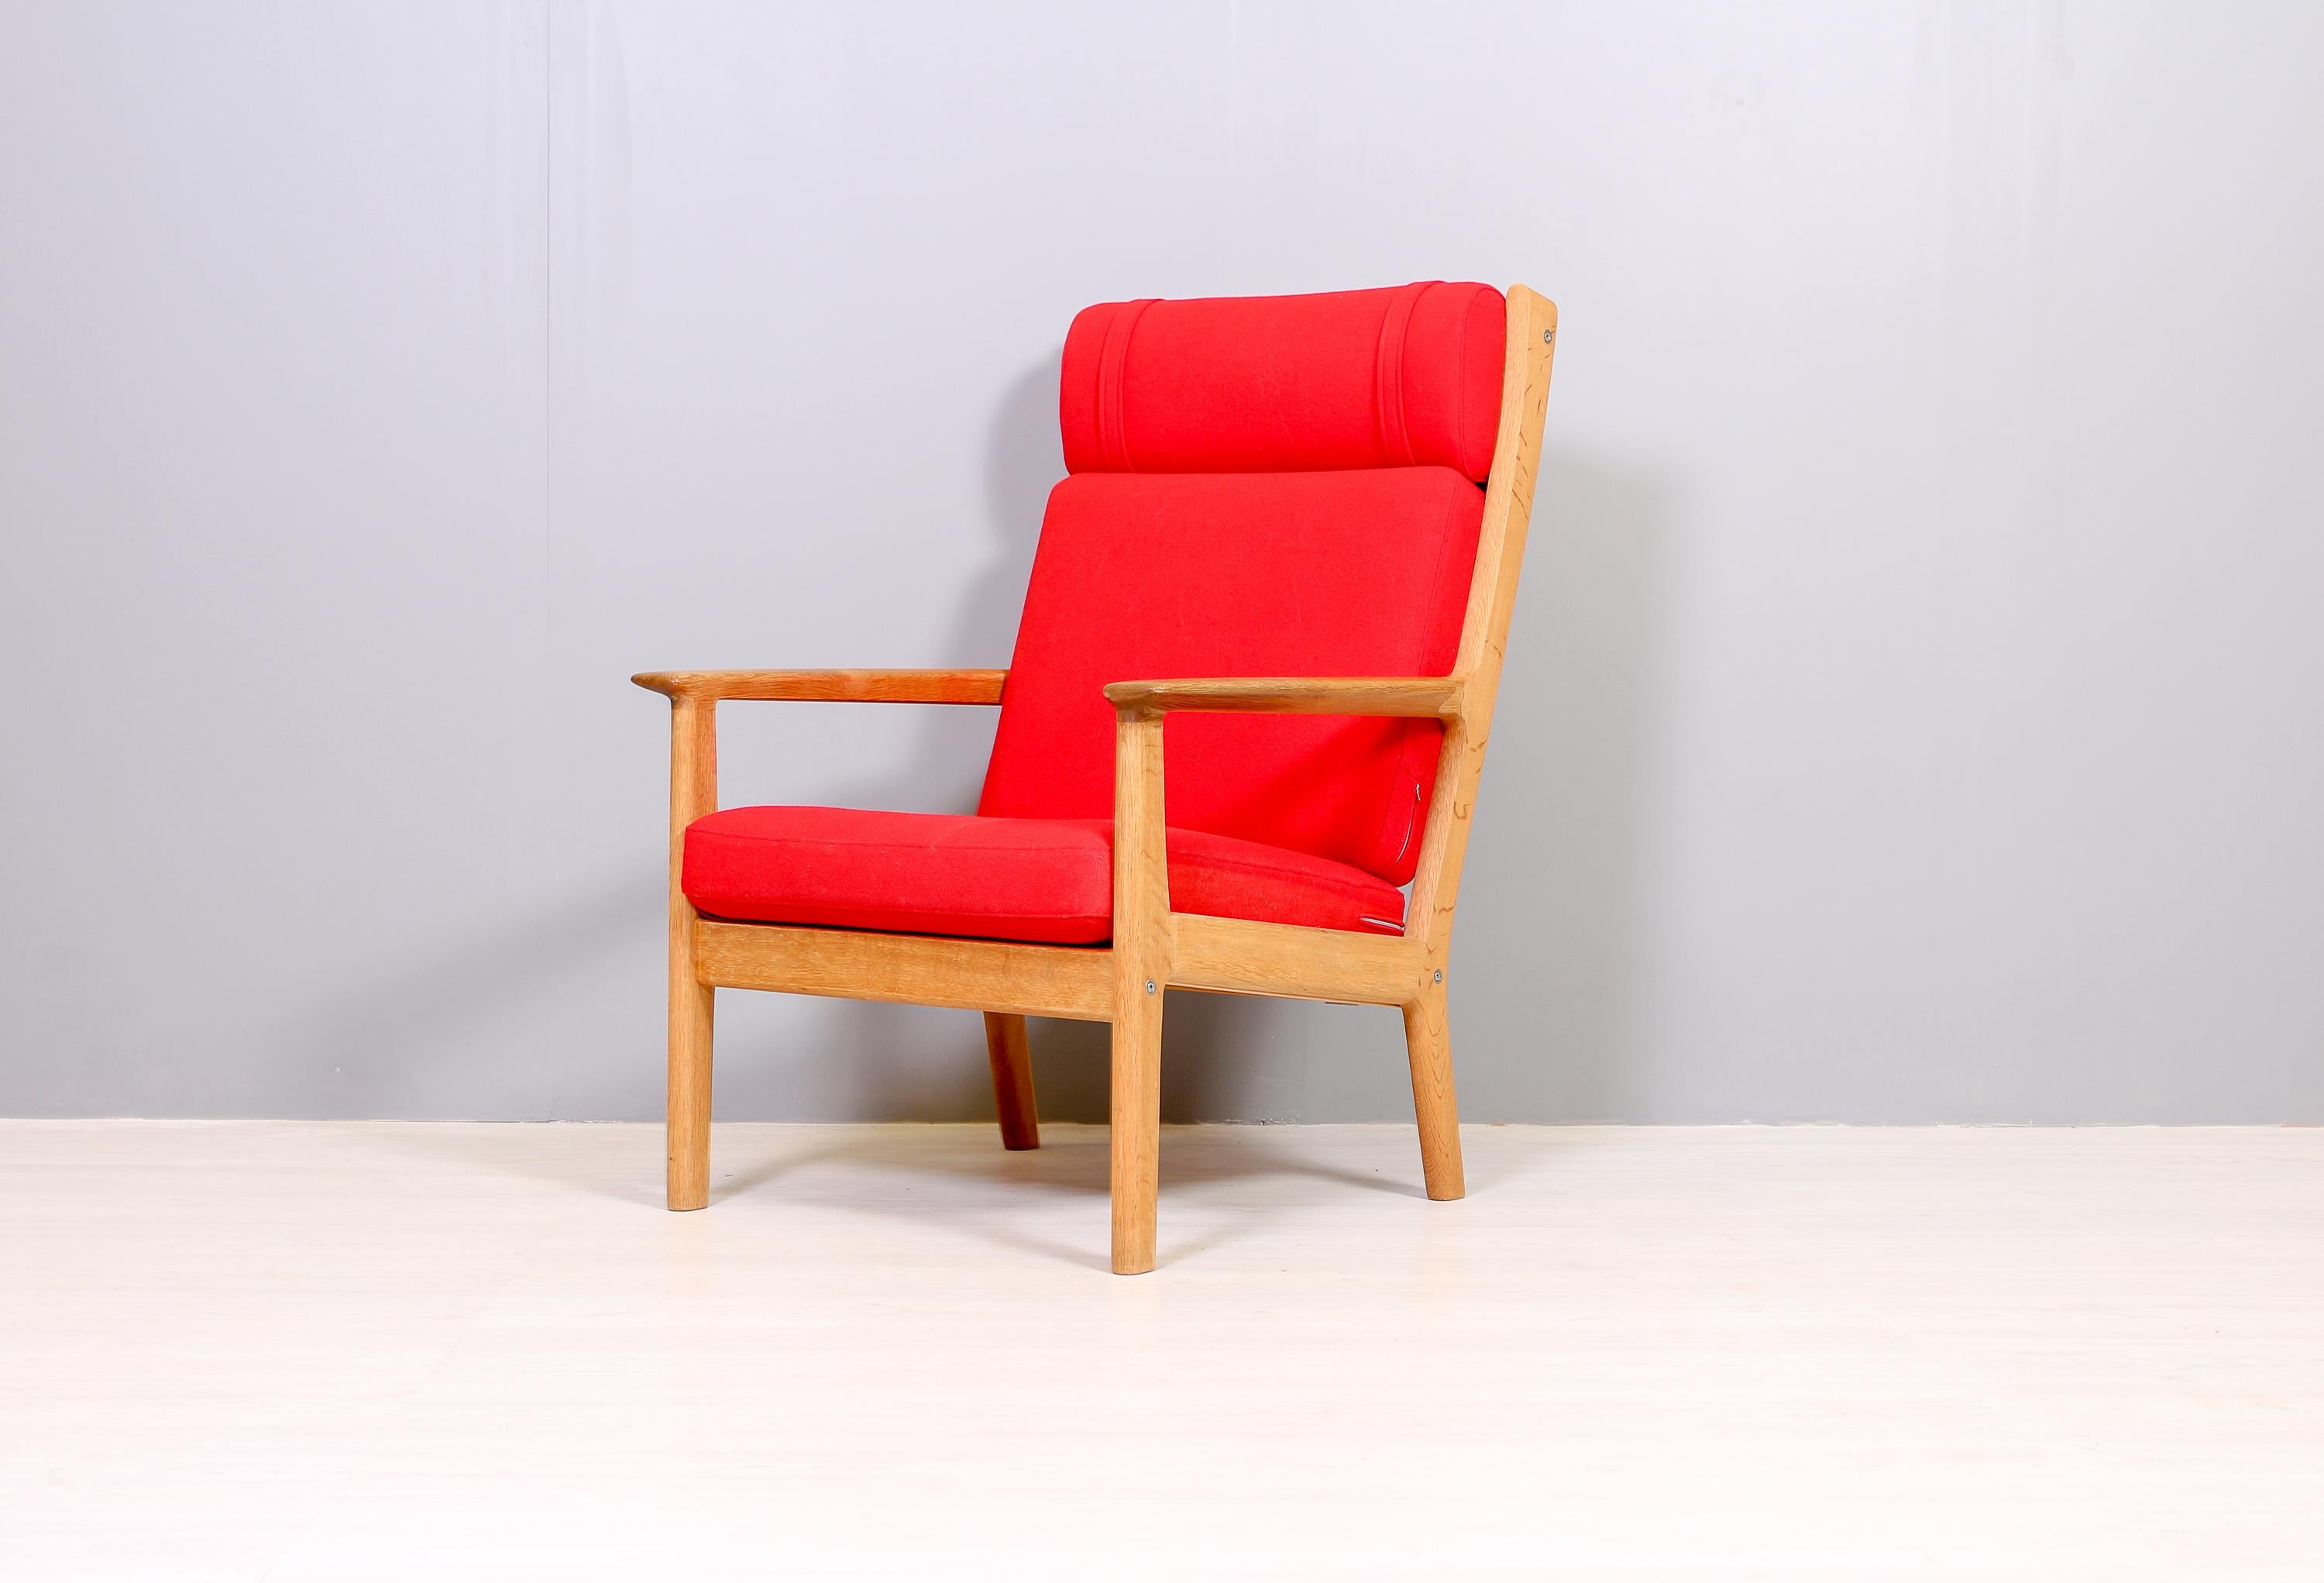 This highly comfortable lounge chair, designed by Hans J Wegner for Danish manufacturer GETAMA in the 1960s, is one of many great designs that combines comfort, quality materials and modern design. The chair is made out of solid oak and red wool